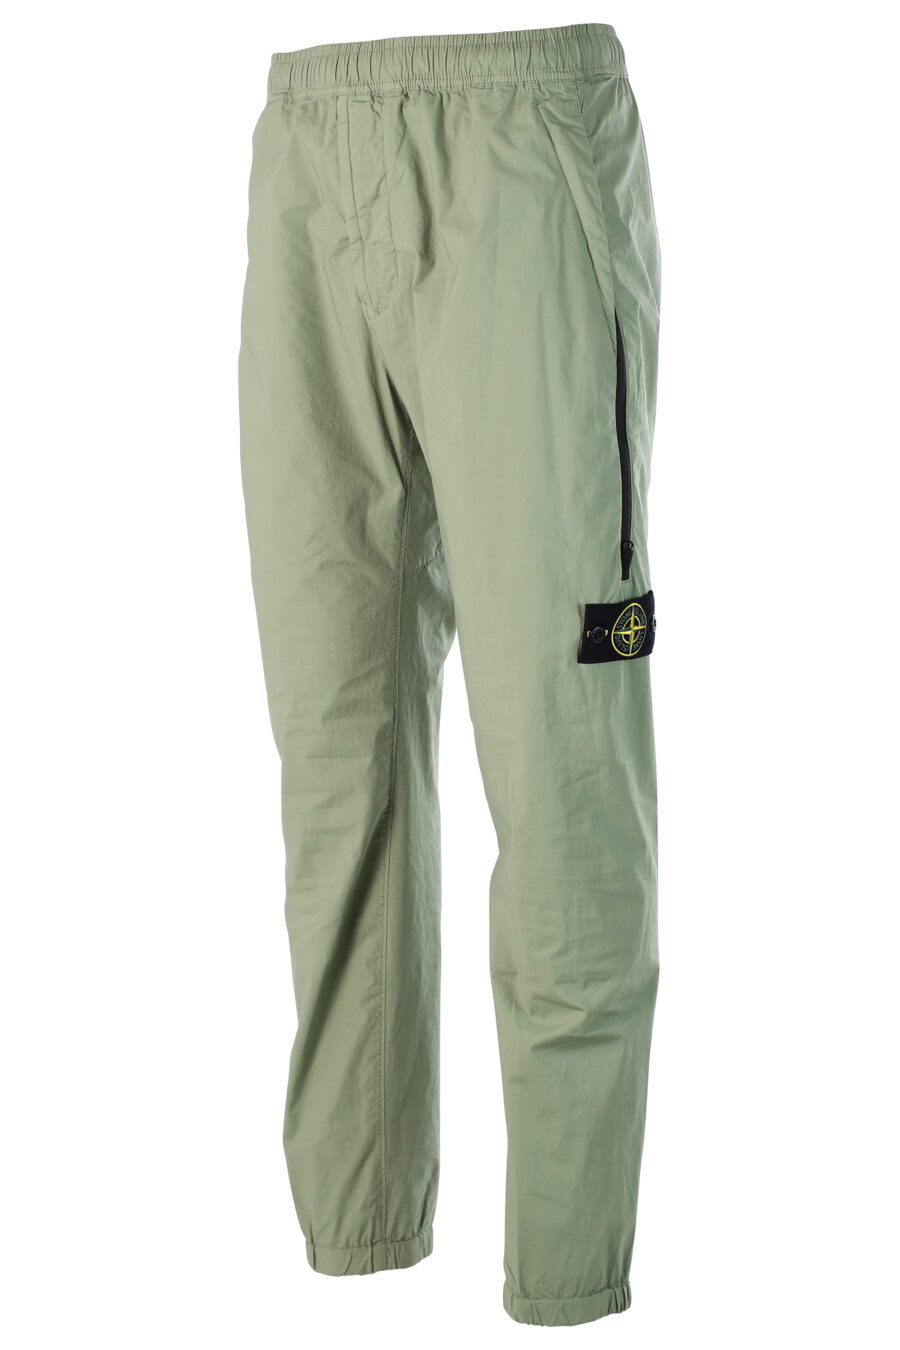 Military green cargo style trousers with patch - 8052572549175 2